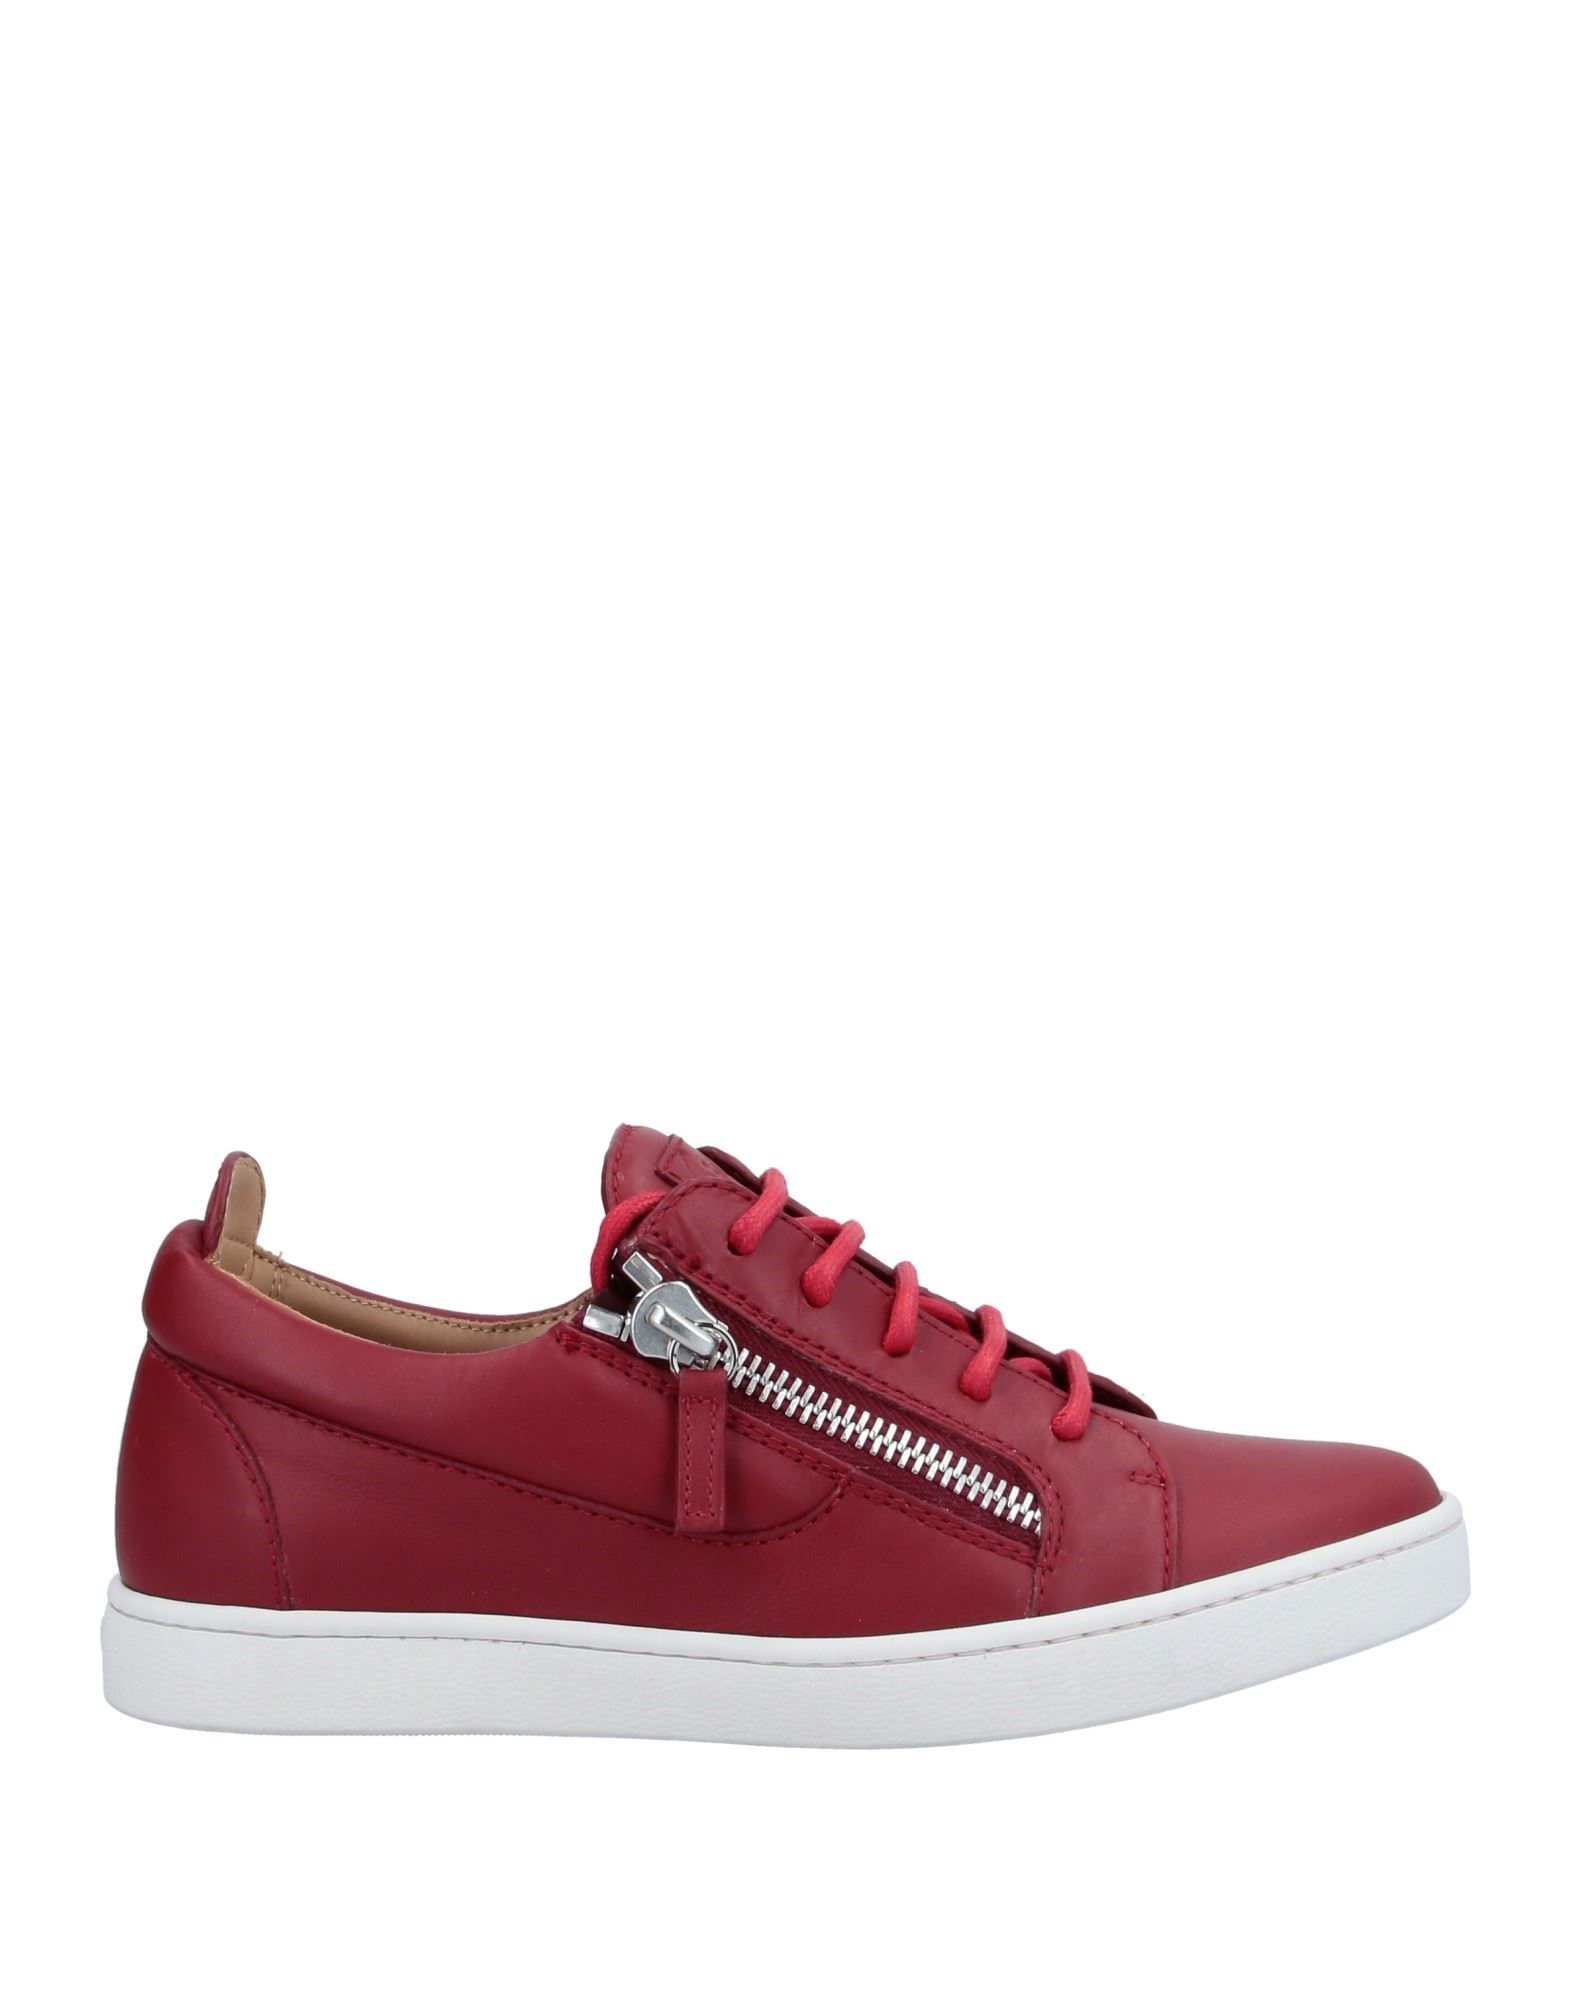 Shop Giuseppe Zanotti Woman Sneakers Red Size 7 Soft Leather